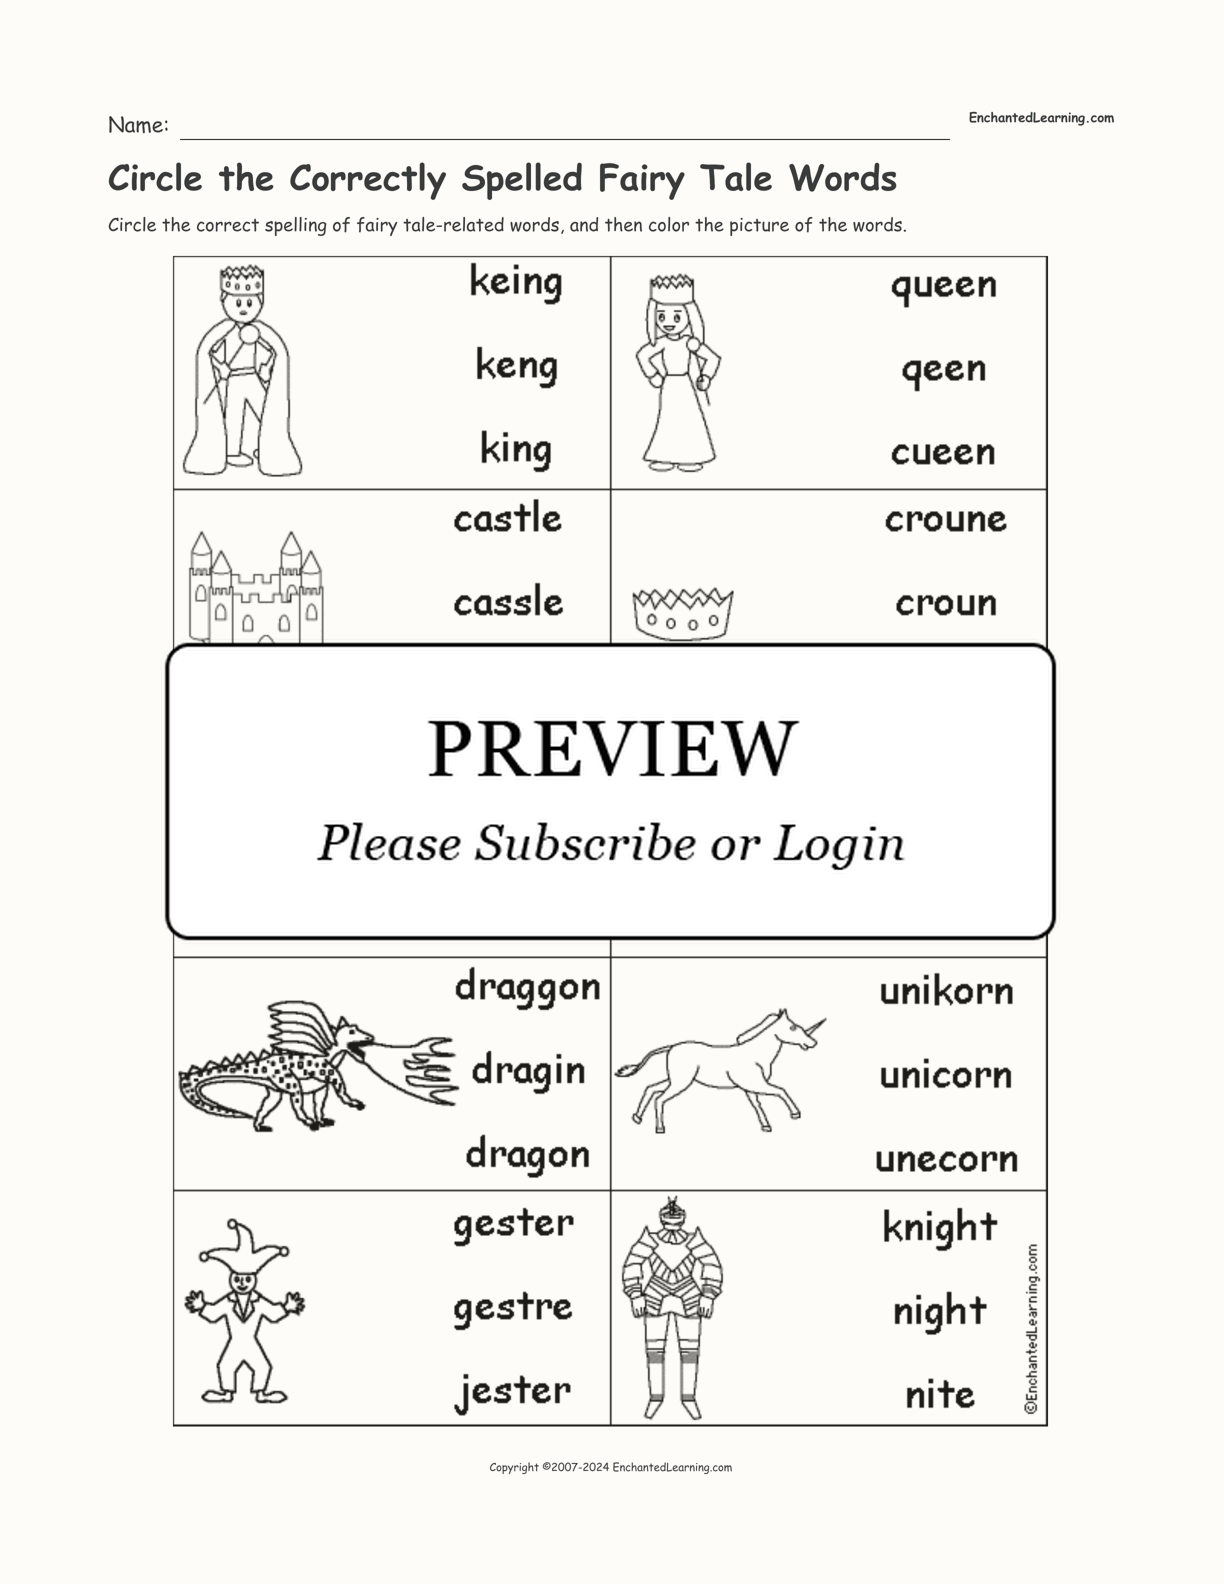 Circle the Correctly Spelled Fairy Tale Words interactive worksheet page 1